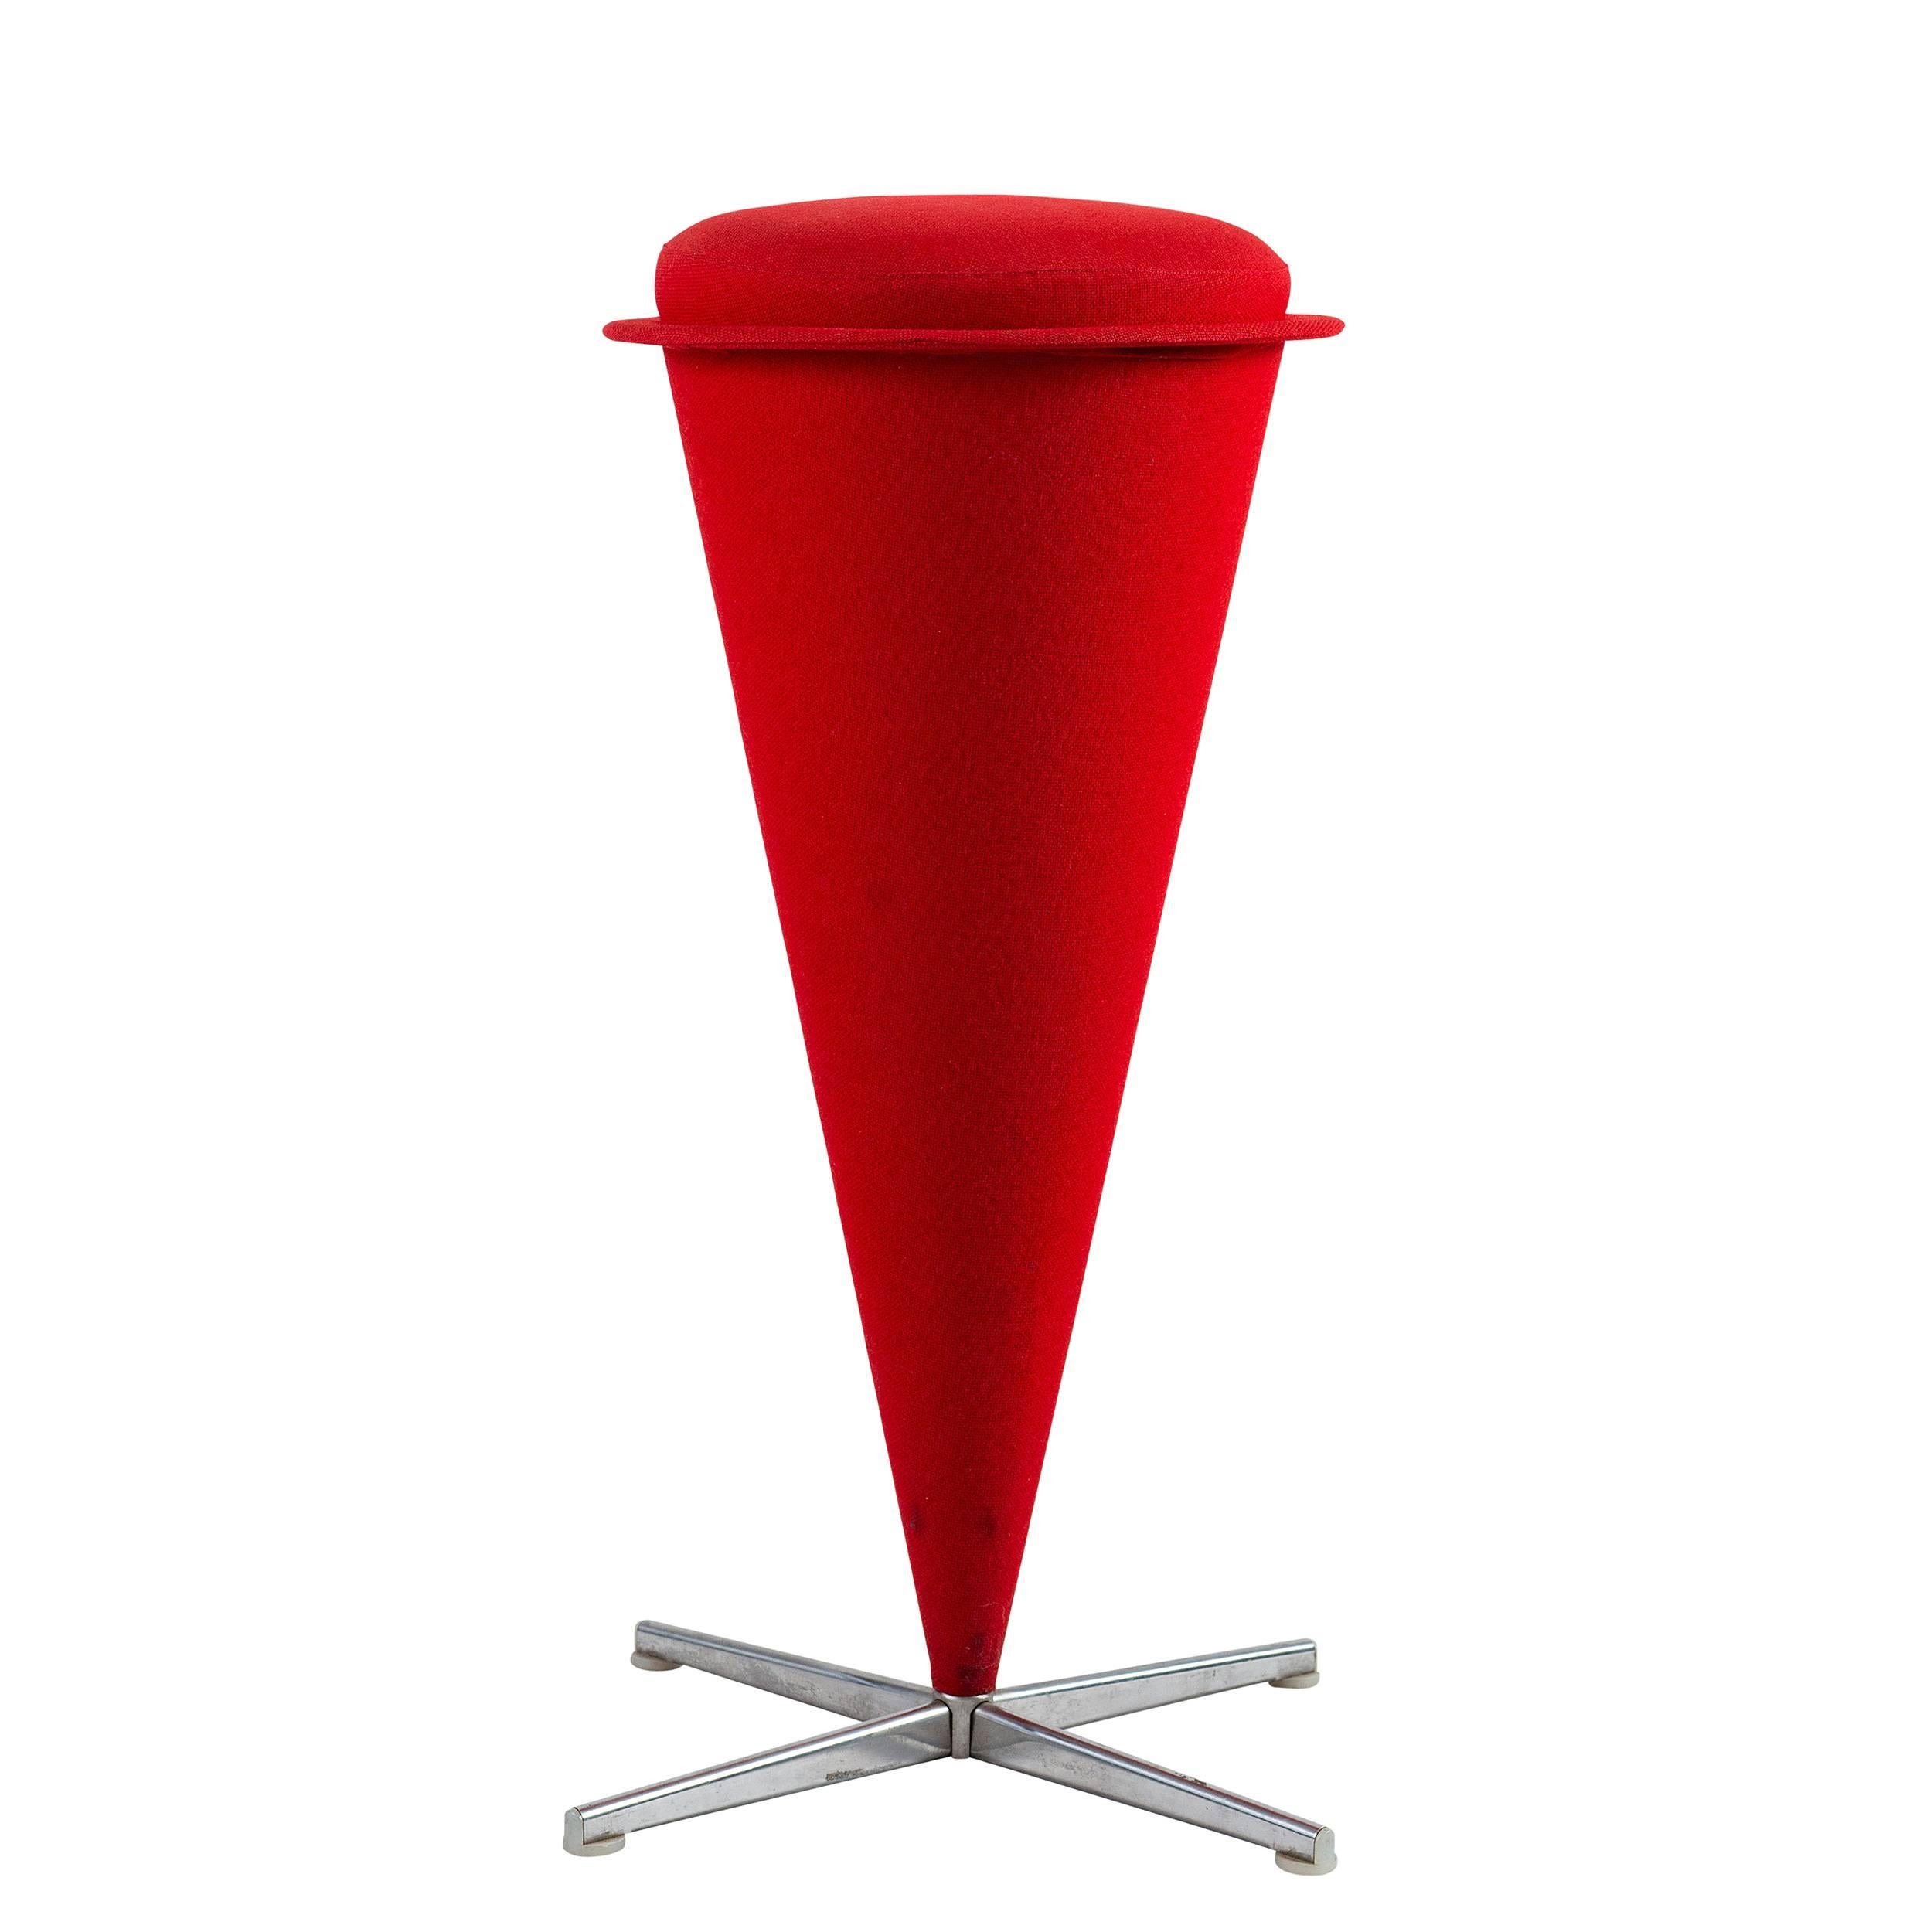 Verner Panton cone bar stools designed in 1958 and produced by Plus-Linje.